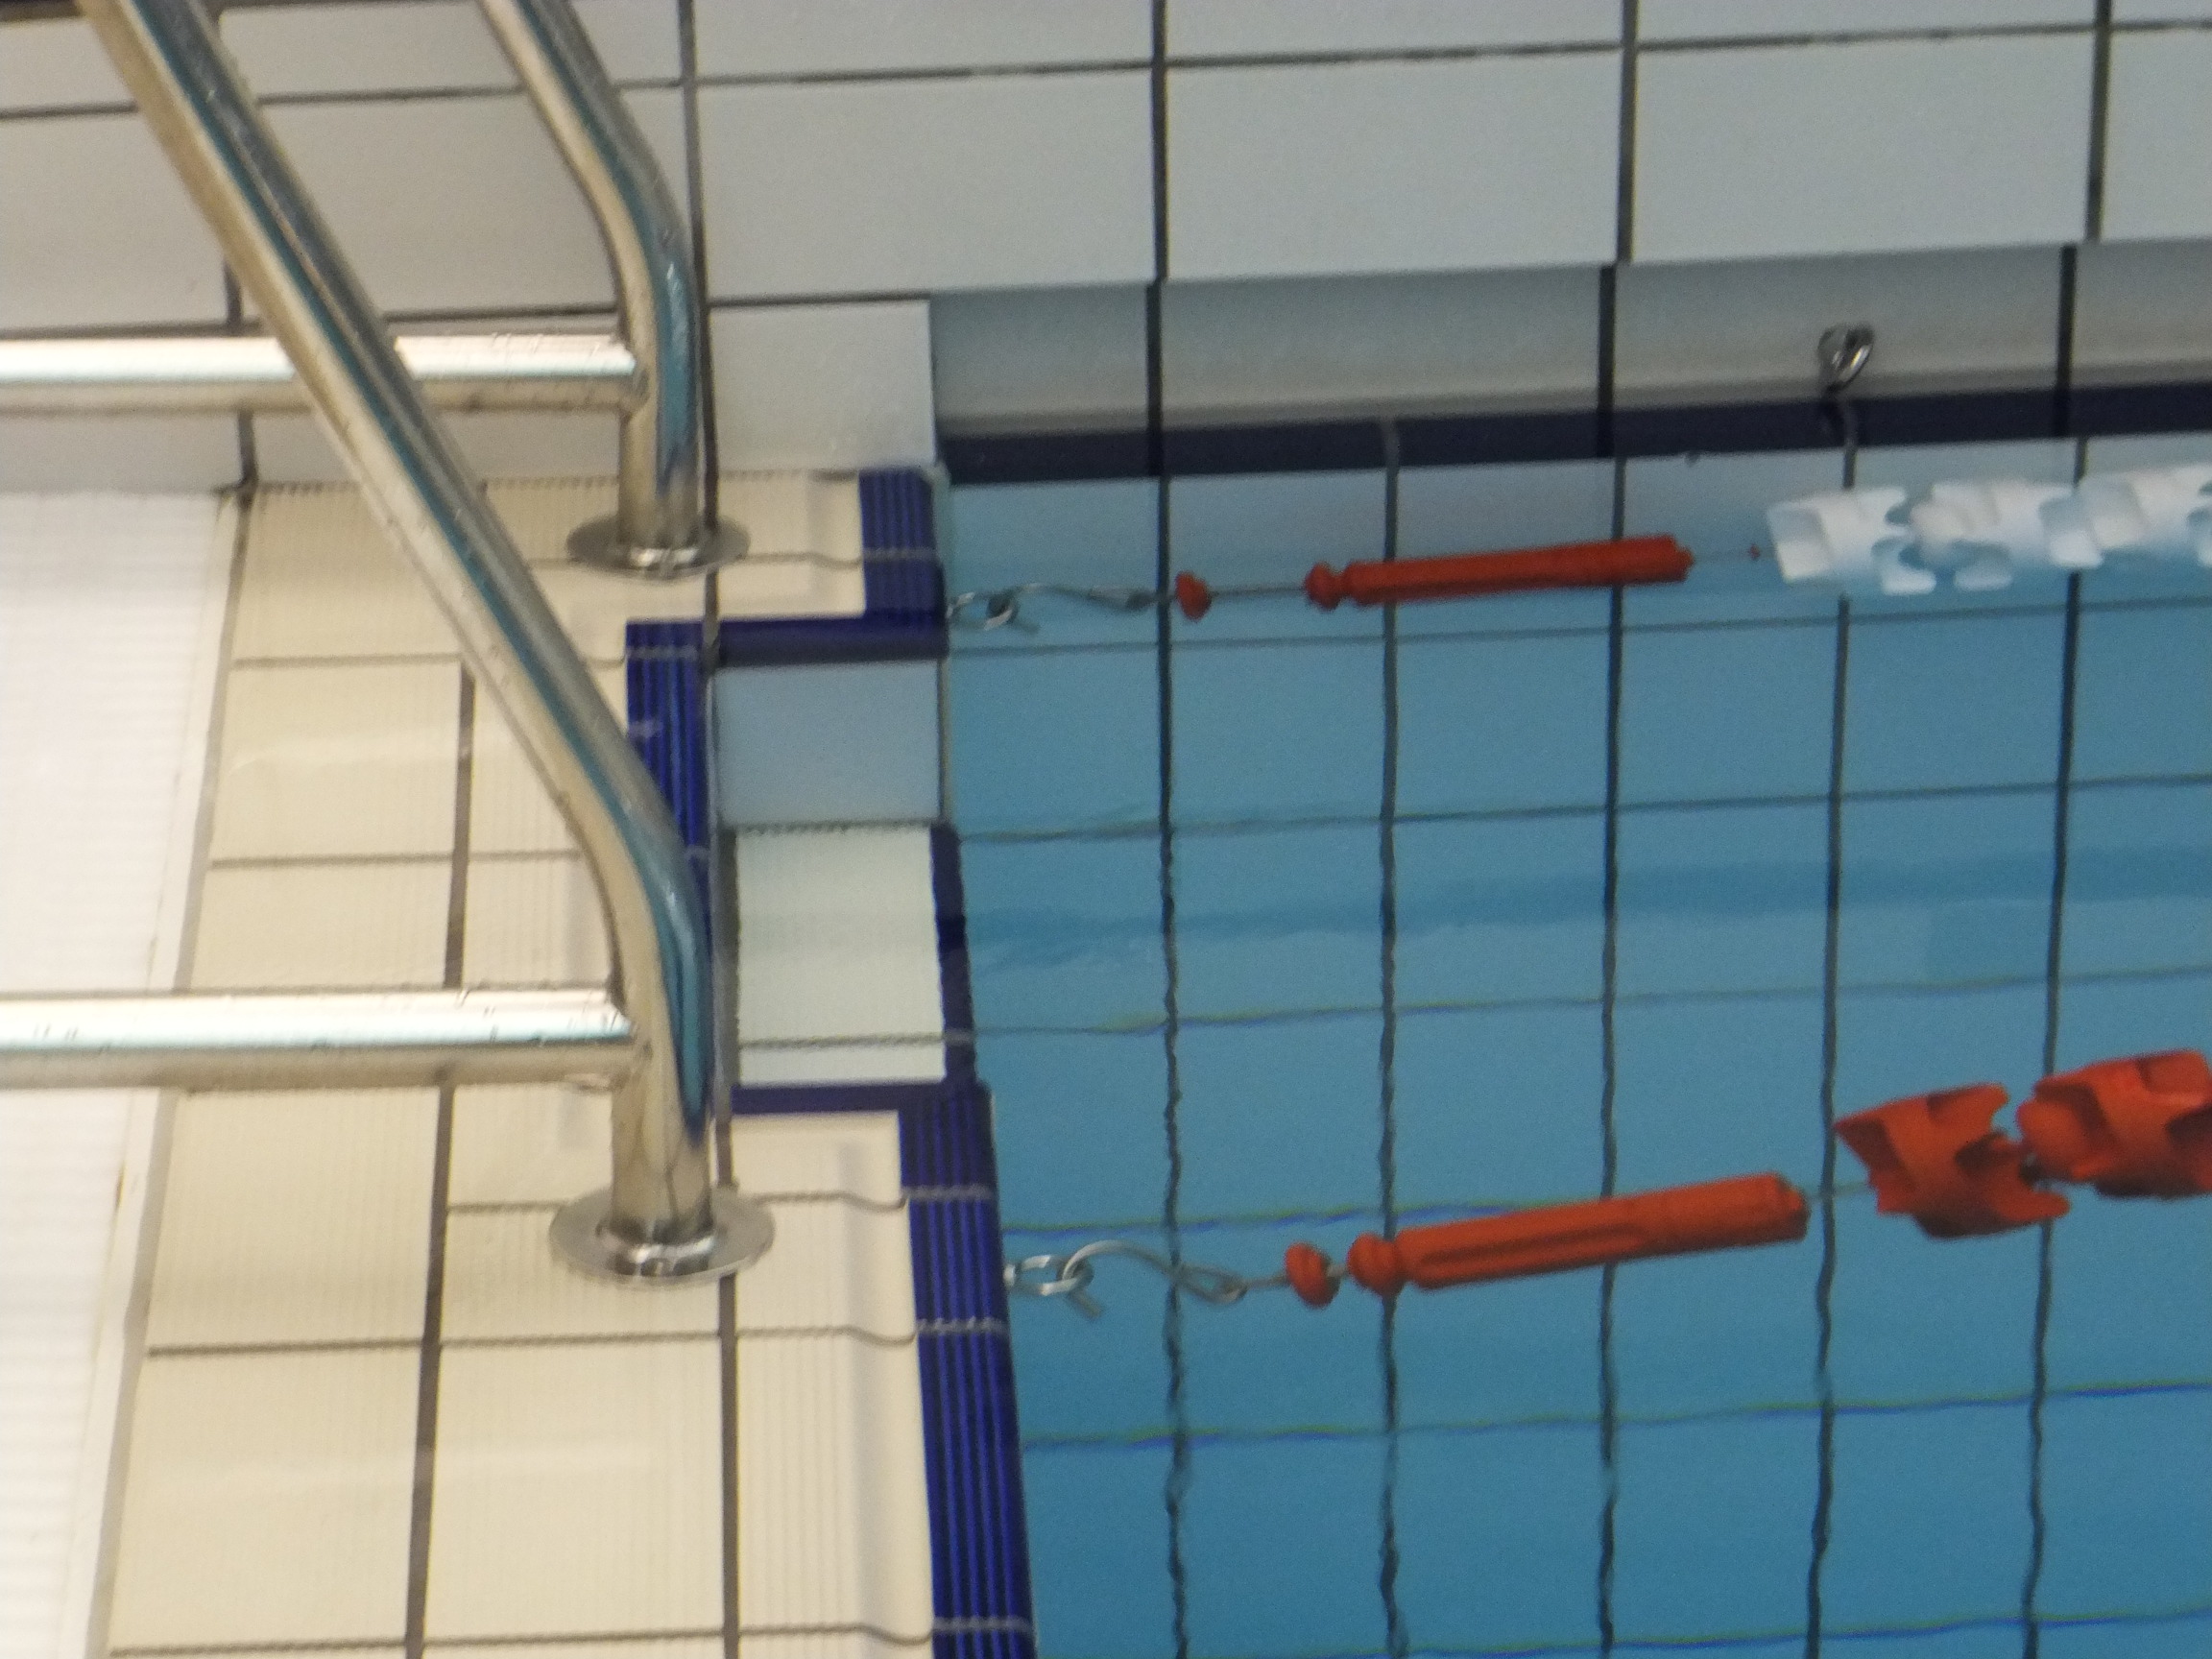 Two removable eyebolts on each side of the pool were installed for each goal 